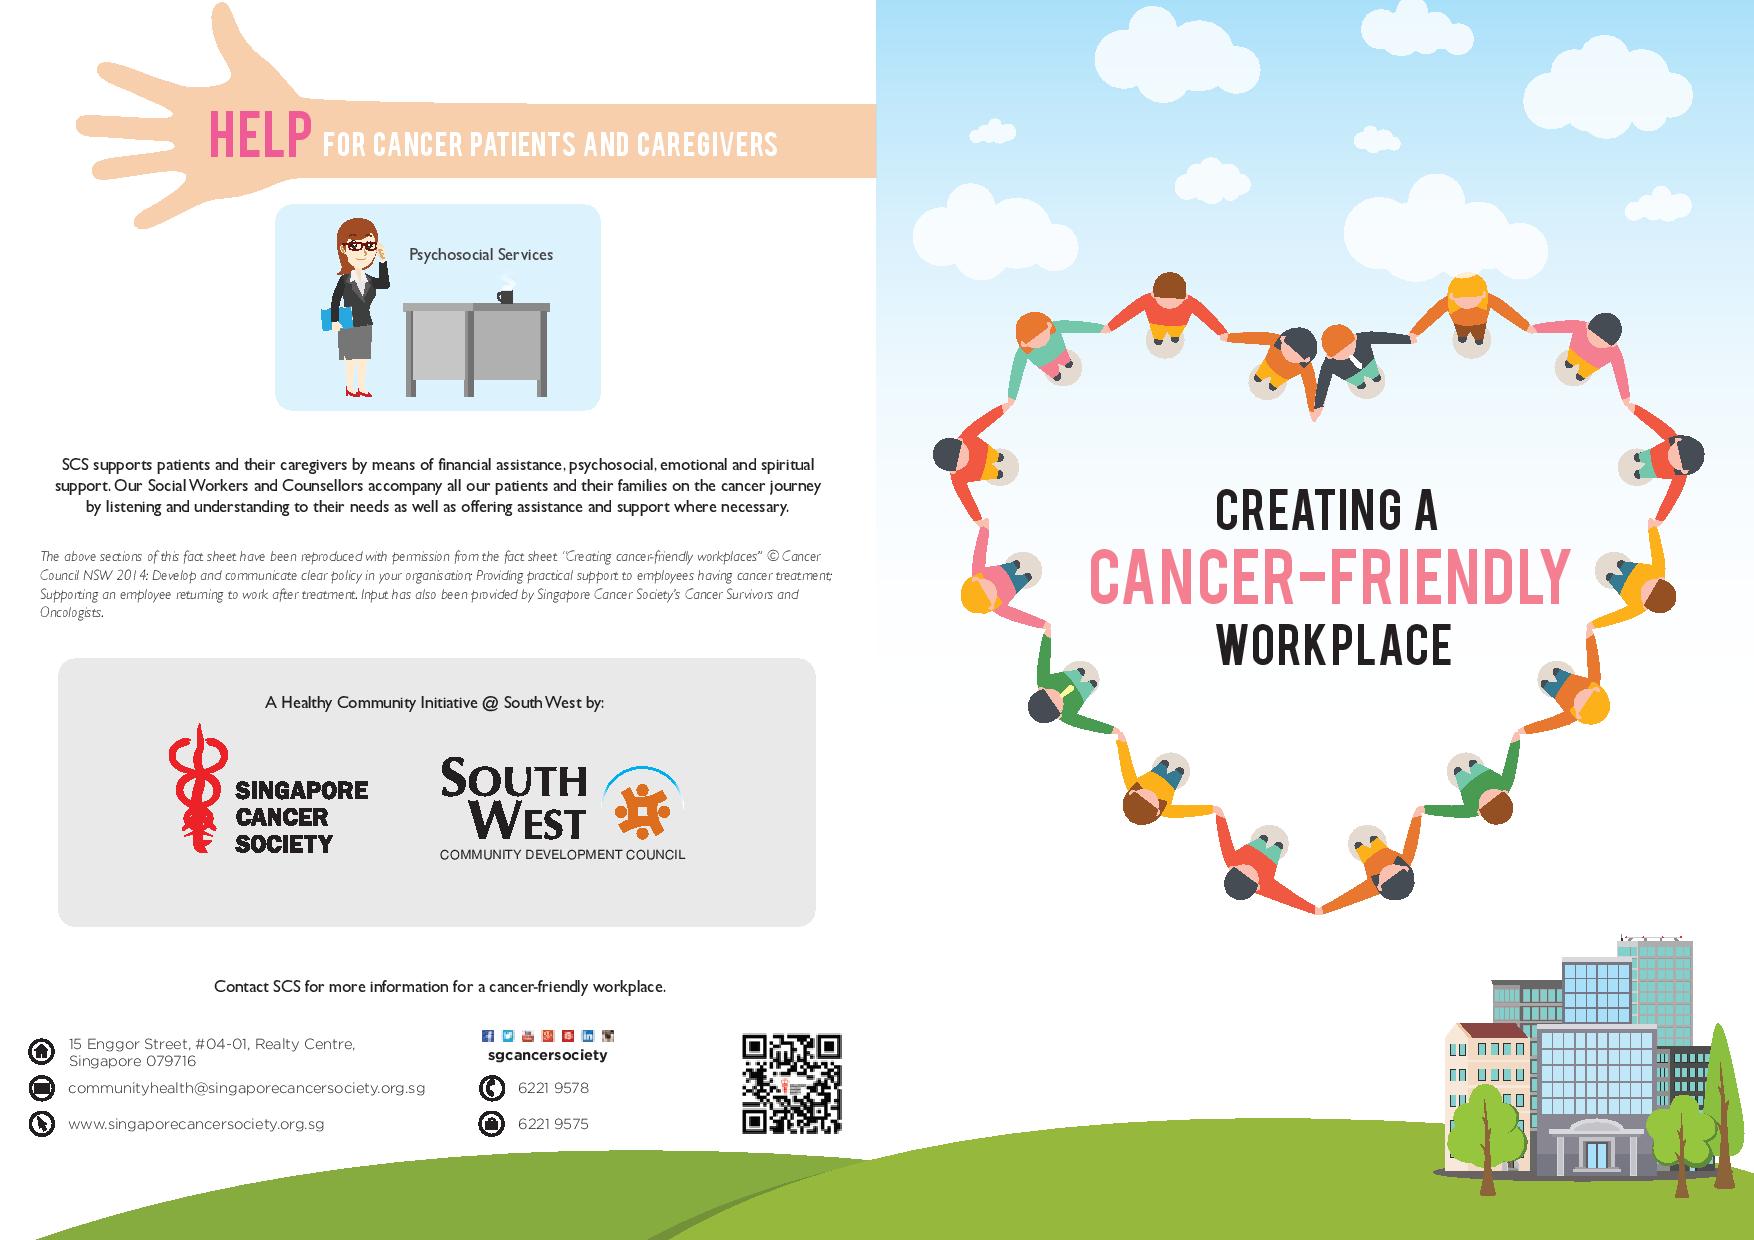 CREATING A CANCER-FRIENDLY WORKPLACE